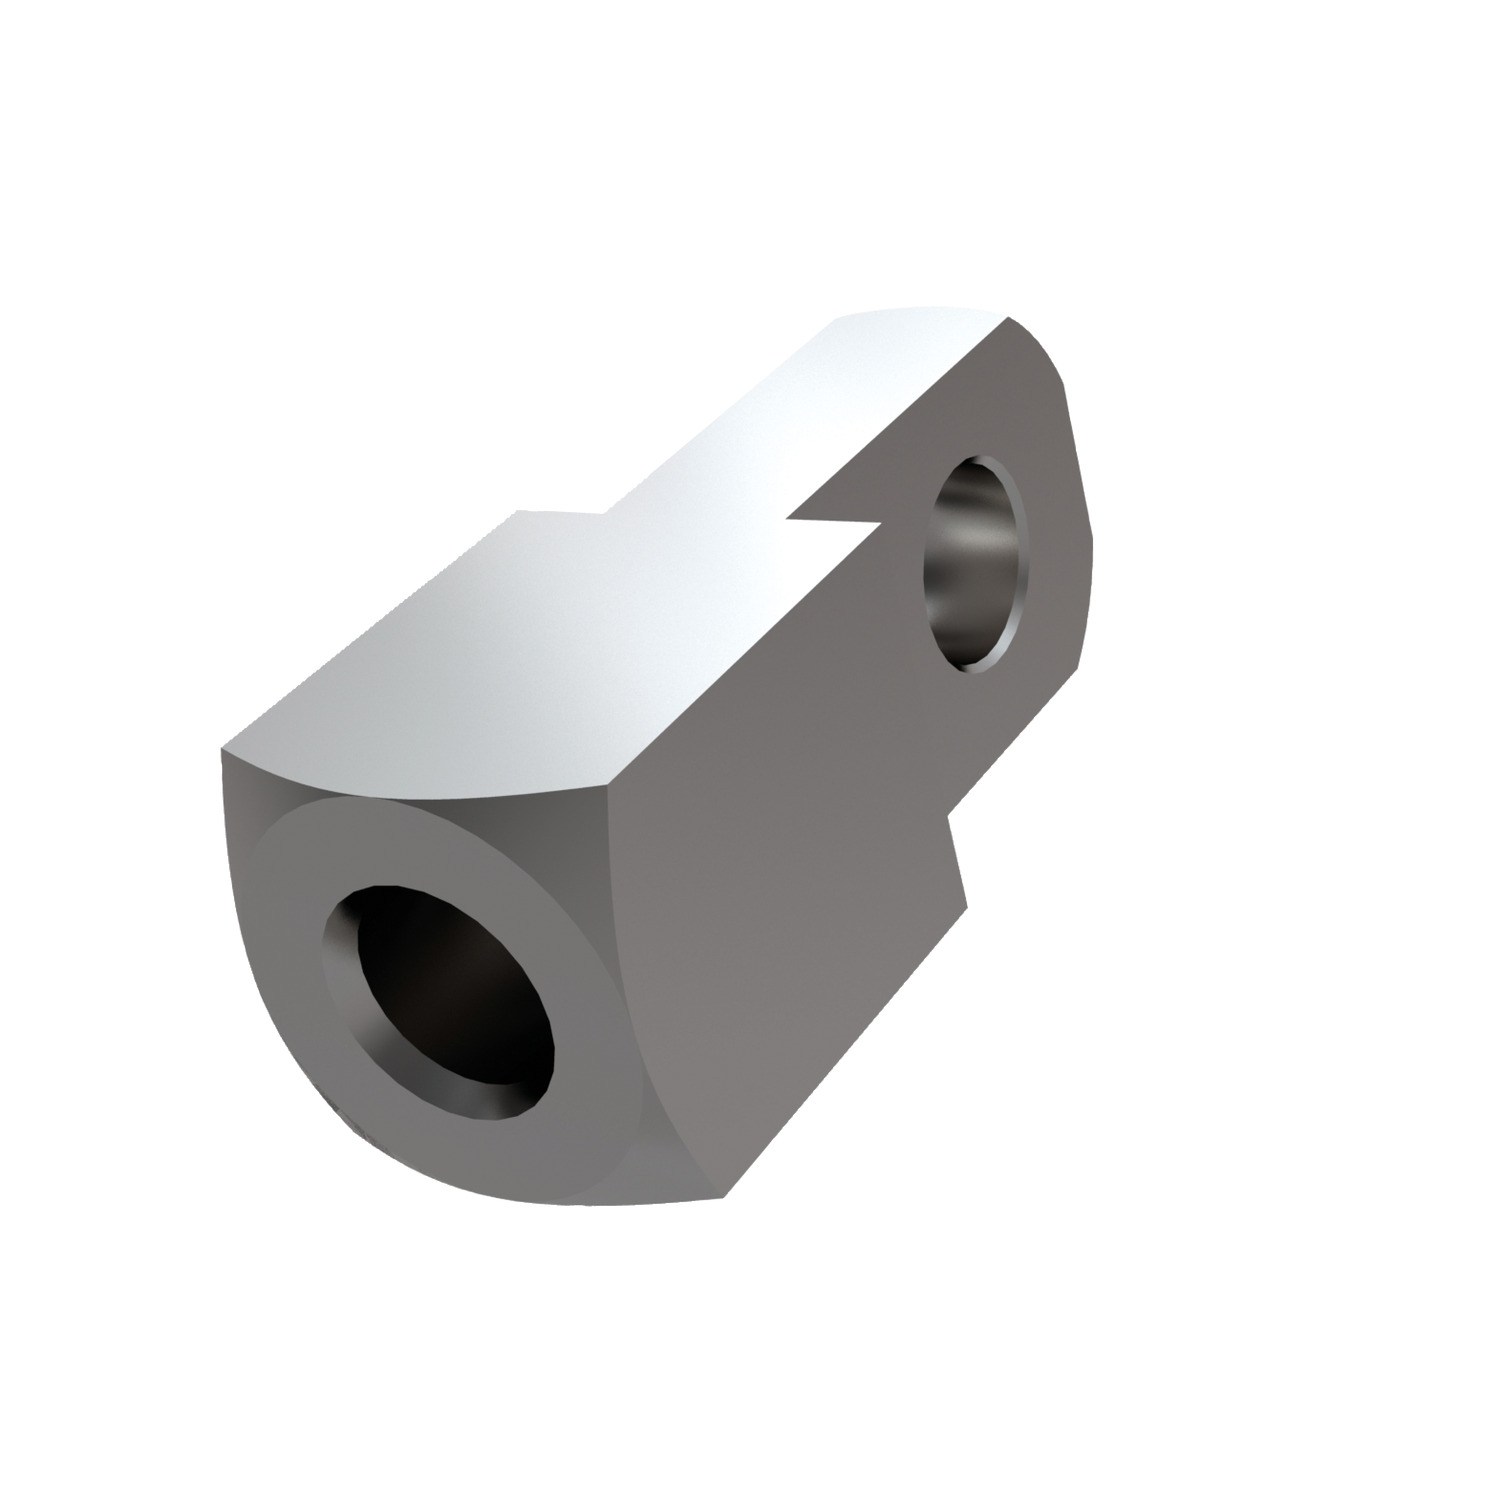 65656 Stainless Mating Piece for Clevis Joints